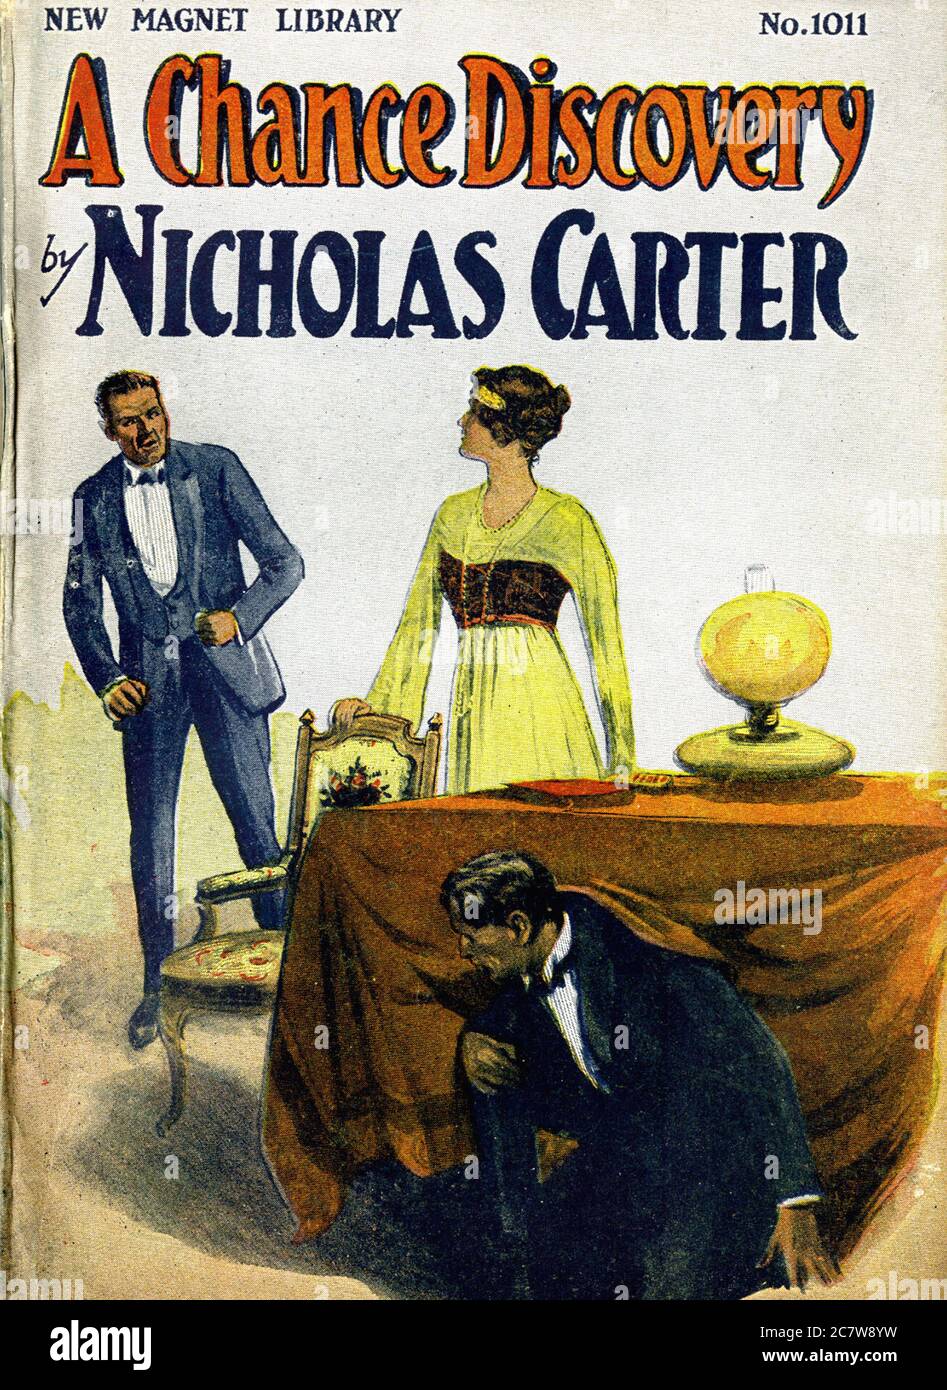 Nicholas Carter - A Chance Discovery - New Magnet Library - Vintage Pulp Literary Stock Photo